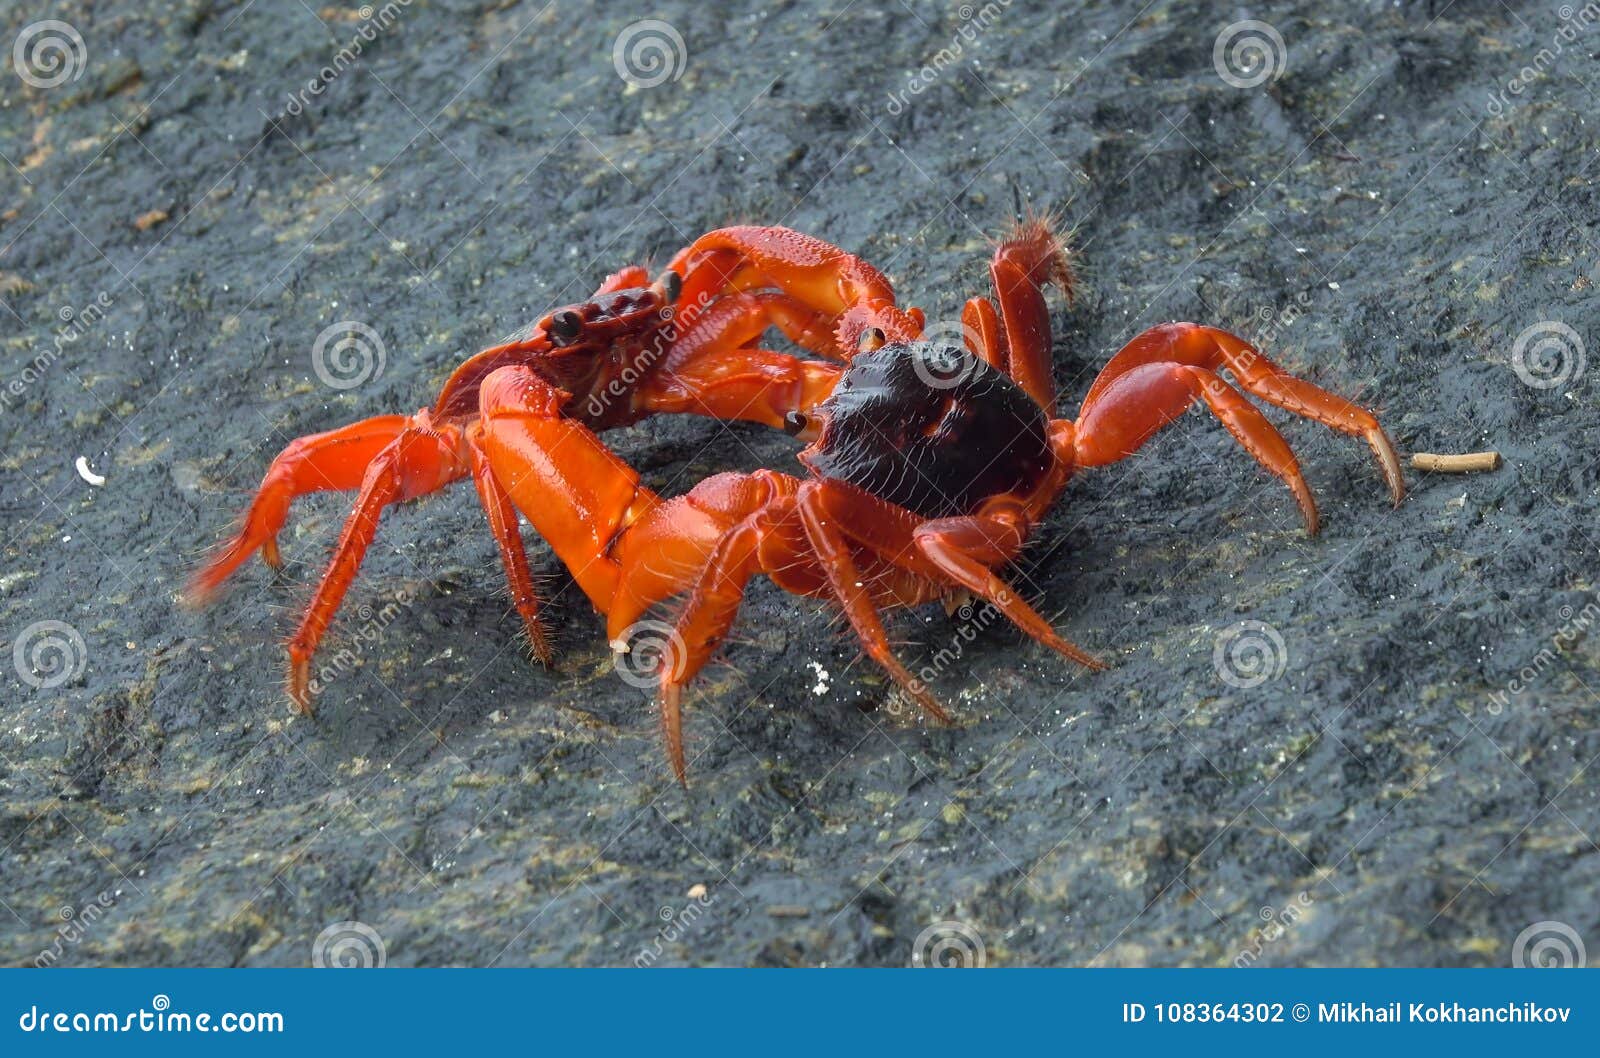 Two red crabs fighting stock photo. Image of beach, fight ...